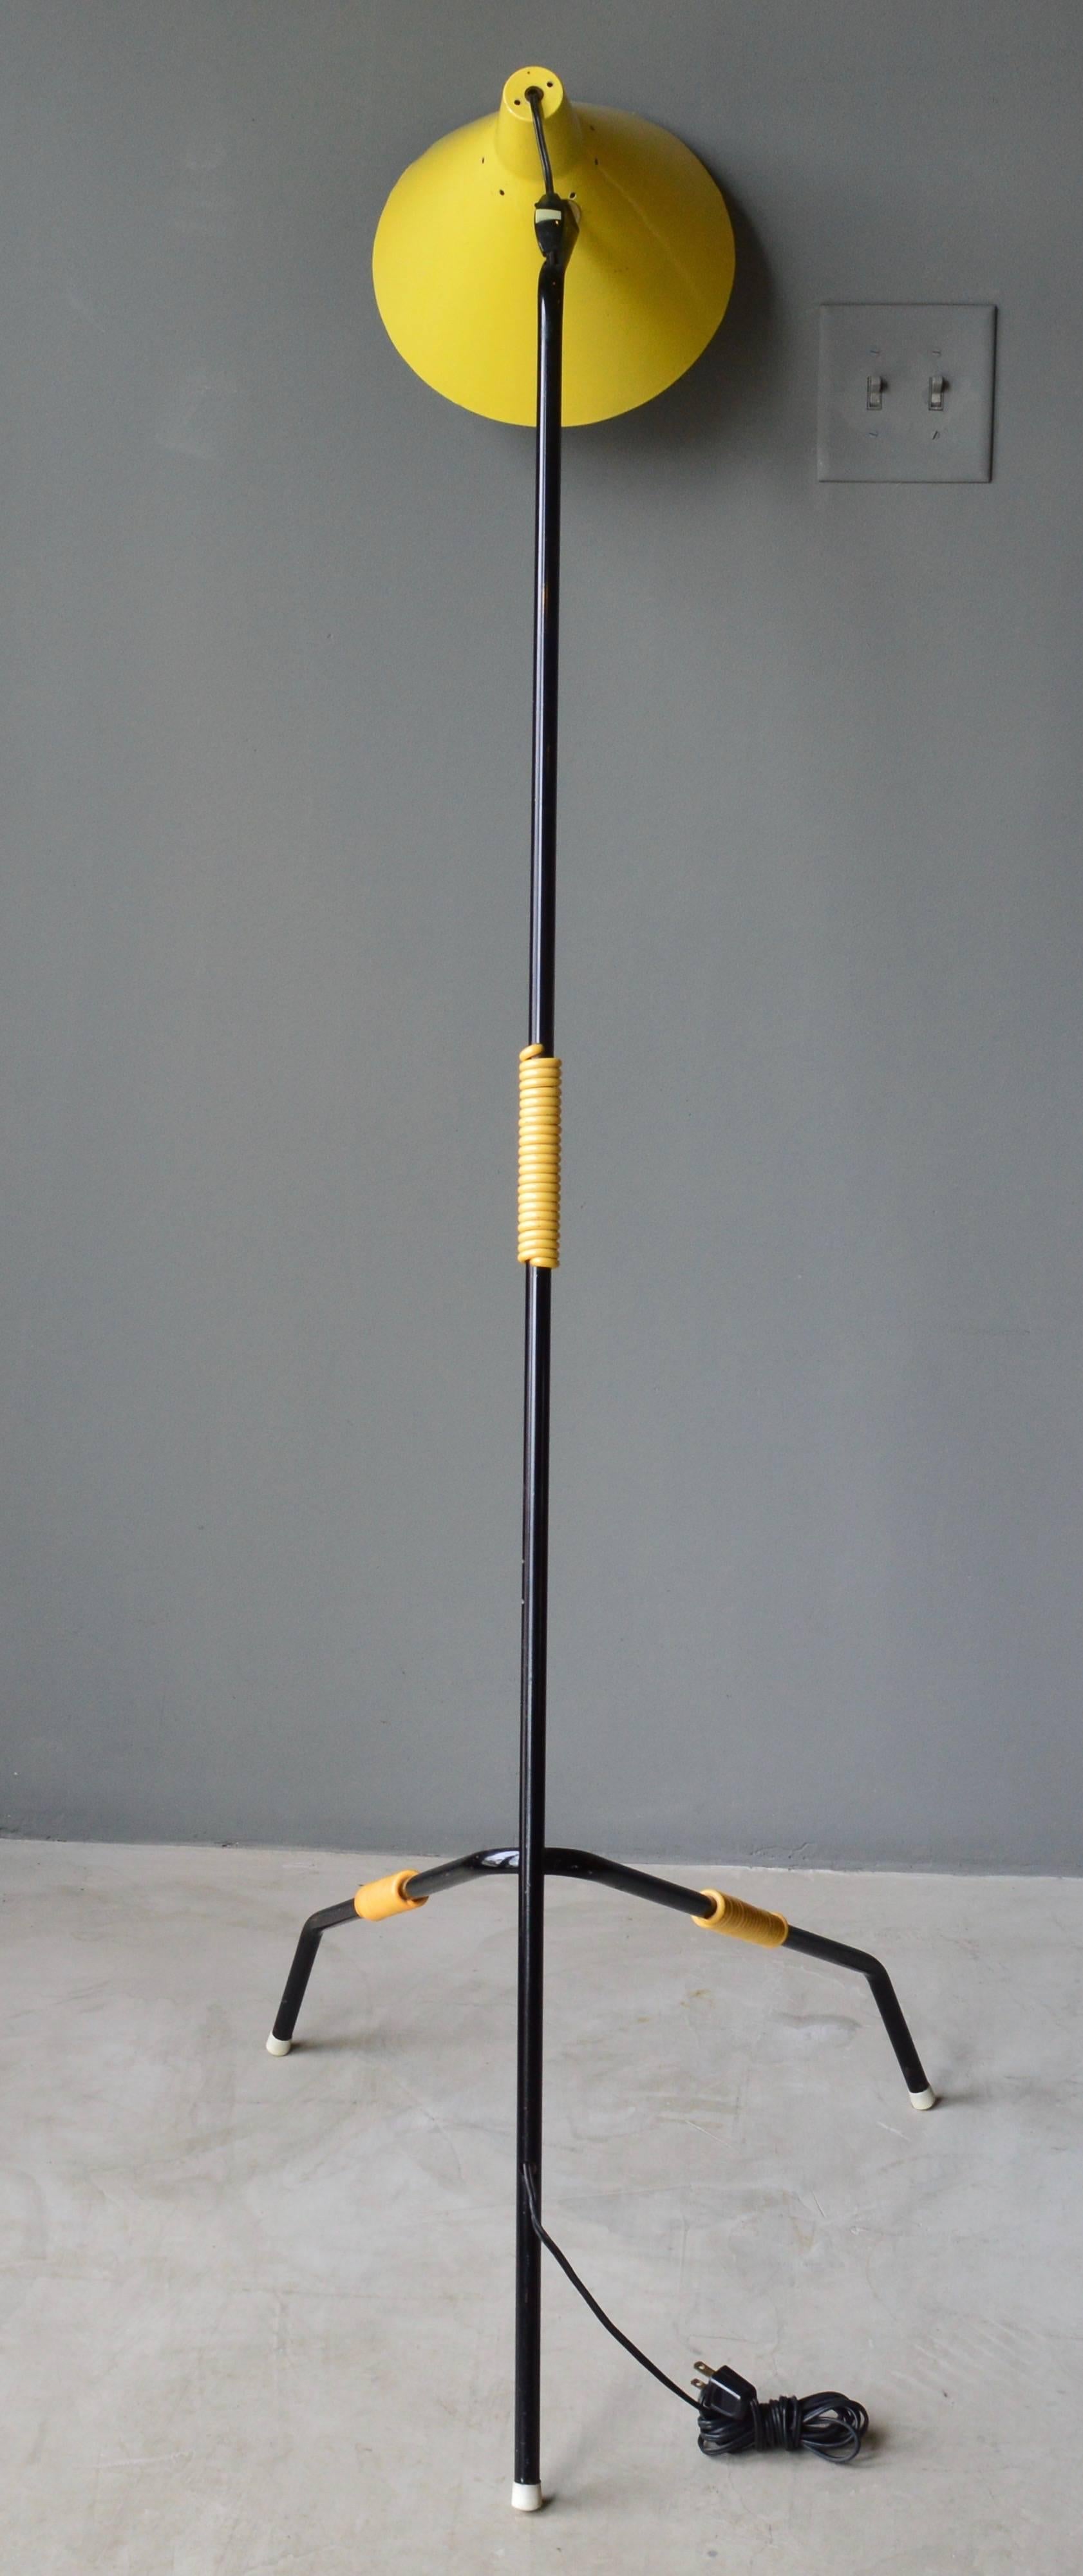 Fantastic sculptural grasshopper floor lamp in the style of Svend Aage Holm Sorensen. Black steel frame with yellow perforated metal shade and yellow detailing throughout. Excellent vintage condition with original patina.